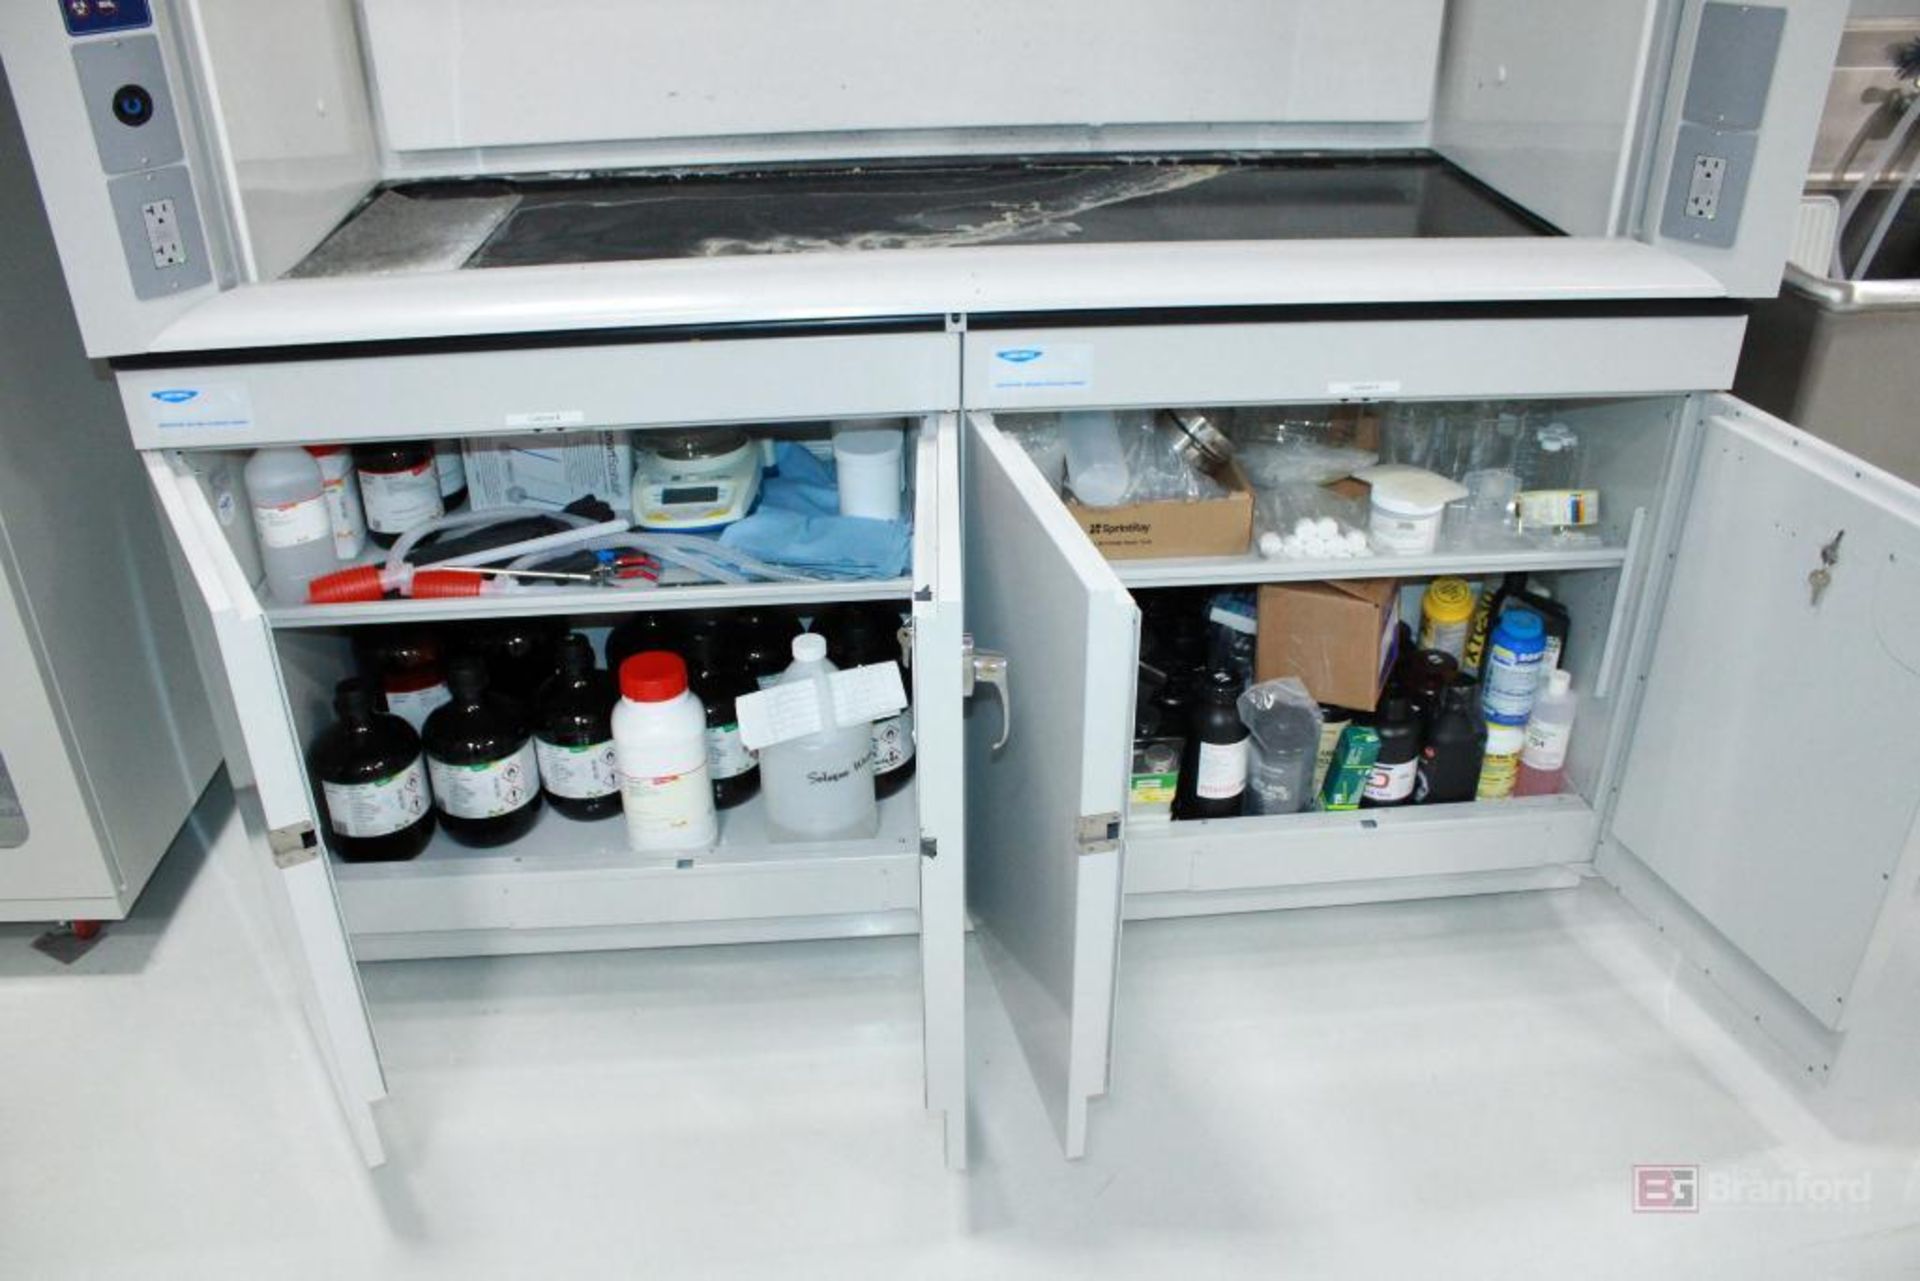 Labconco Premier Chemical Fume Hood & Flammable Cabinet Base - Image 4 of 5